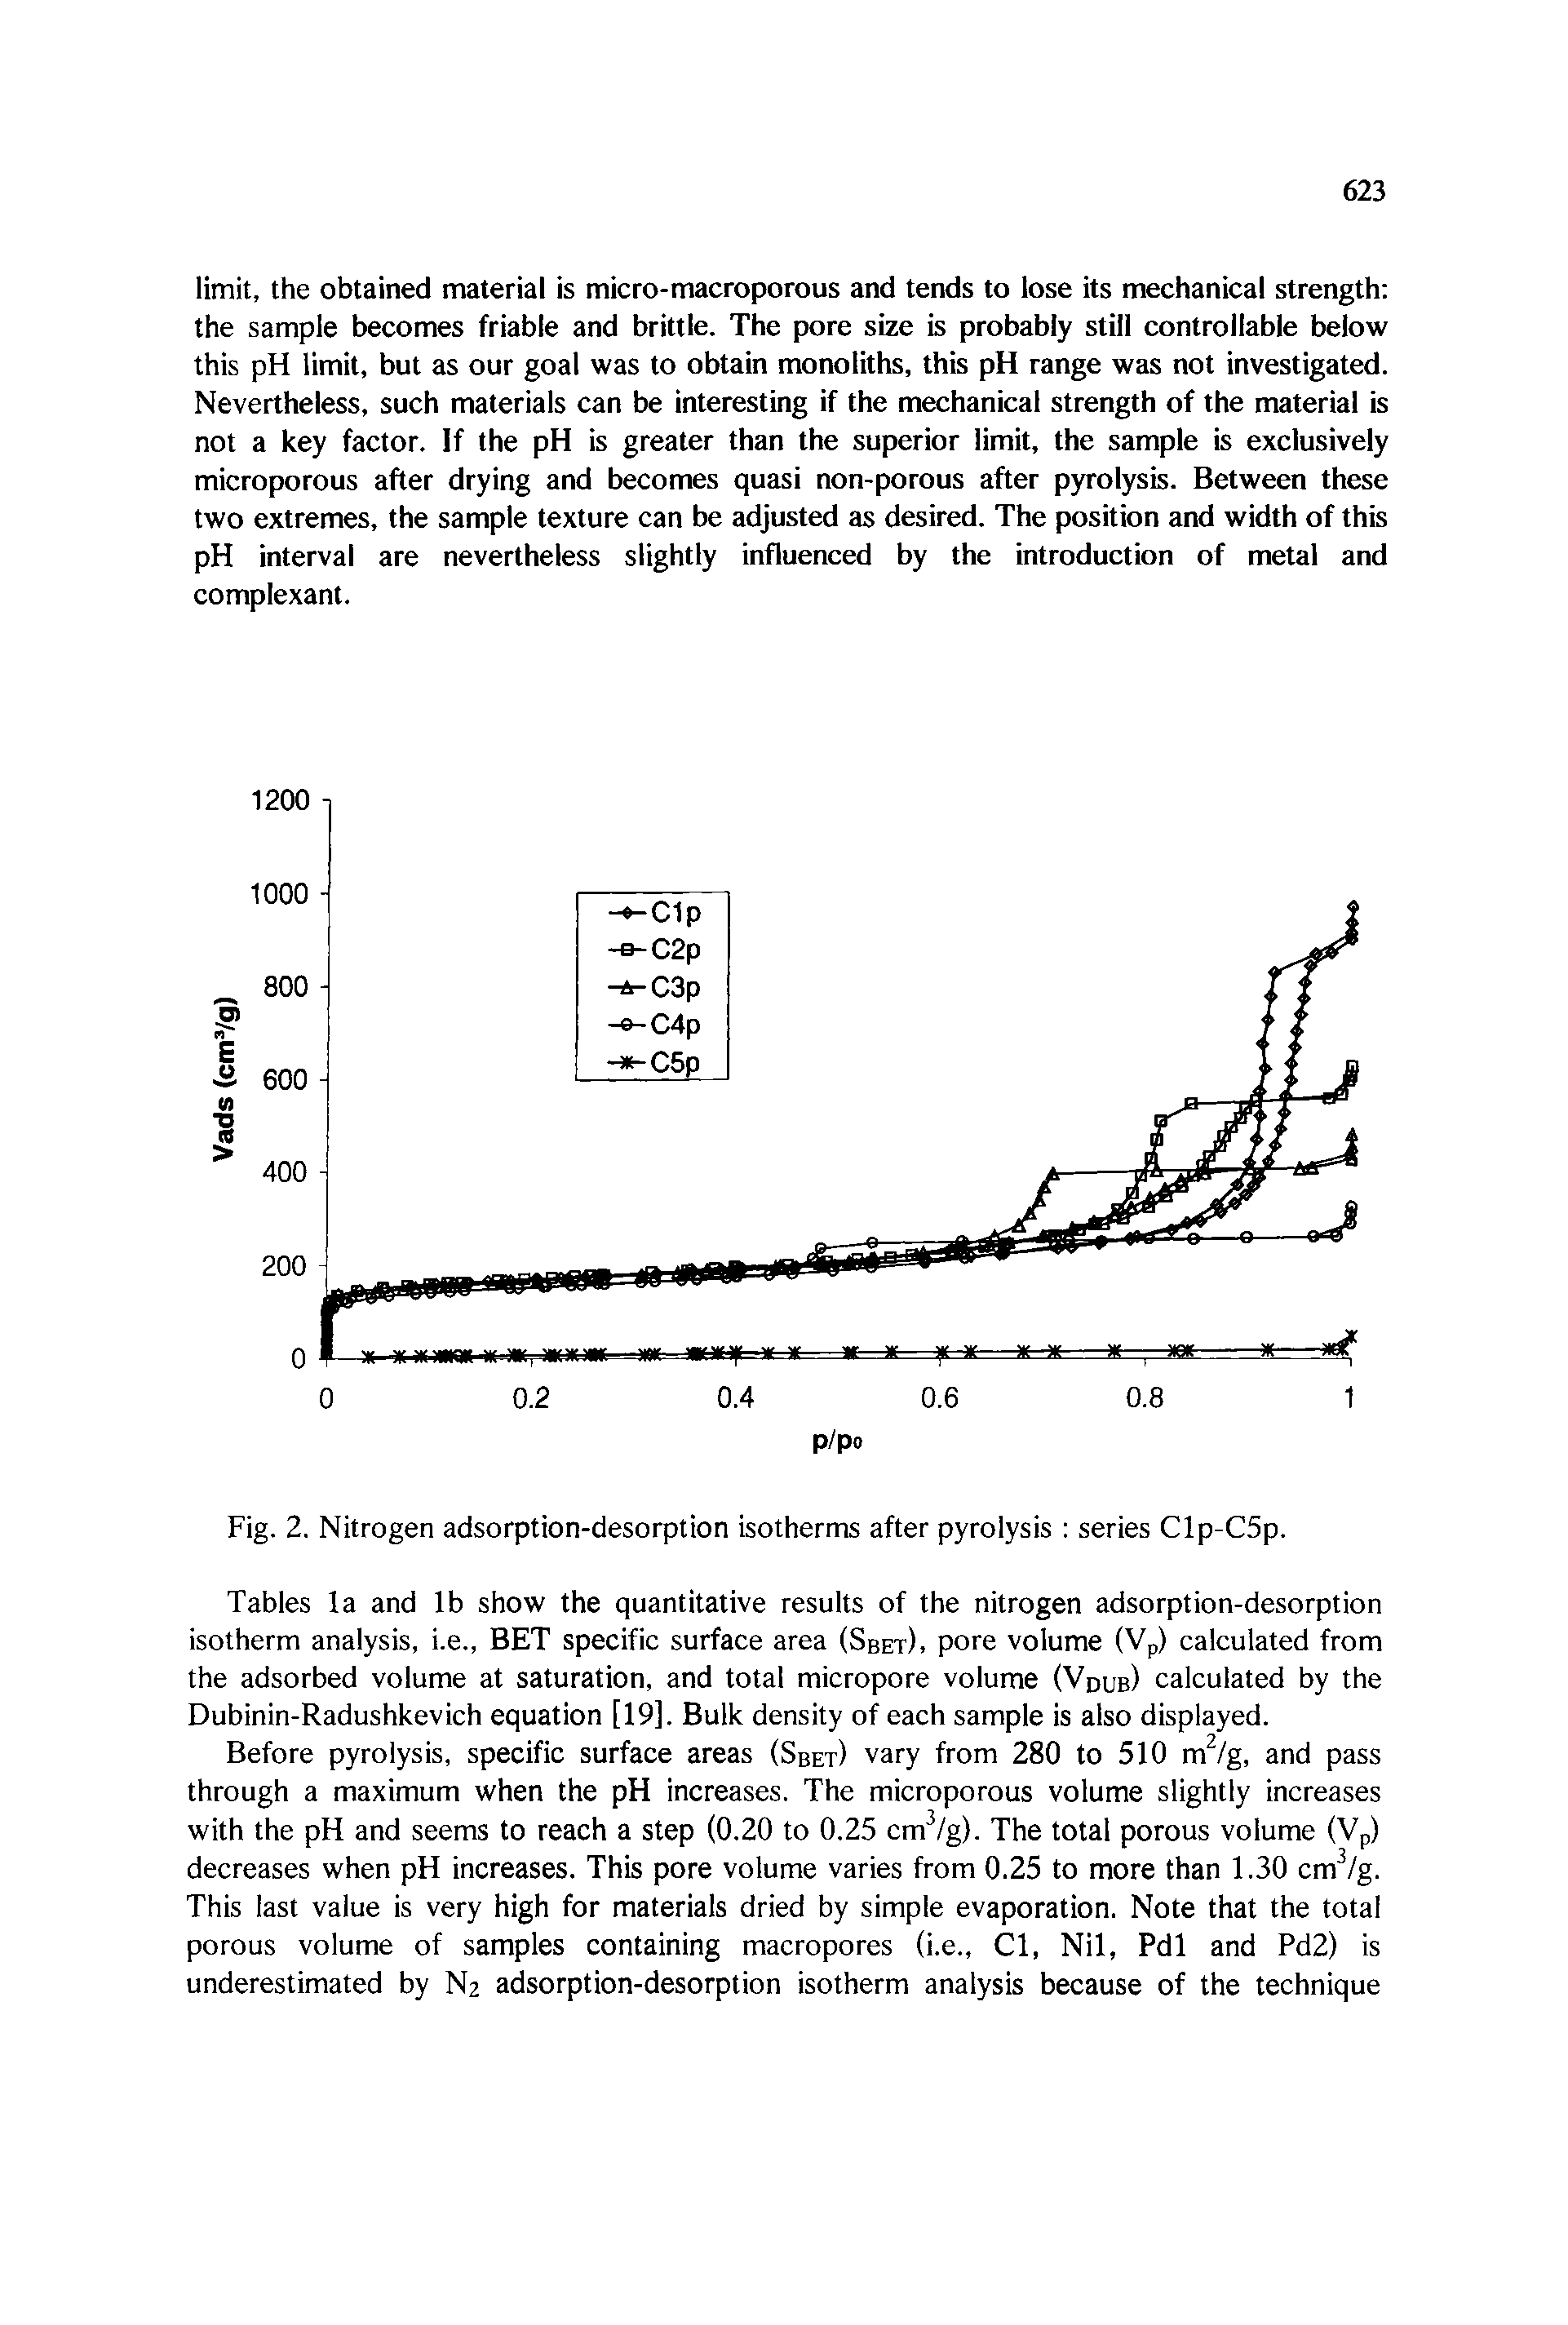 Tables la and lb show the quantitative results of the nitrogen adsorption-desorption isotherm analysis, i.e., BET specific surface area (Sbet), pore volume (Vp) calculated from the adsorbed volume at saturation, and total micropore volume (Vdub) calculated by the Dubinin-Radushkevich equation [19]. Bulk density of each sample is also displayed.